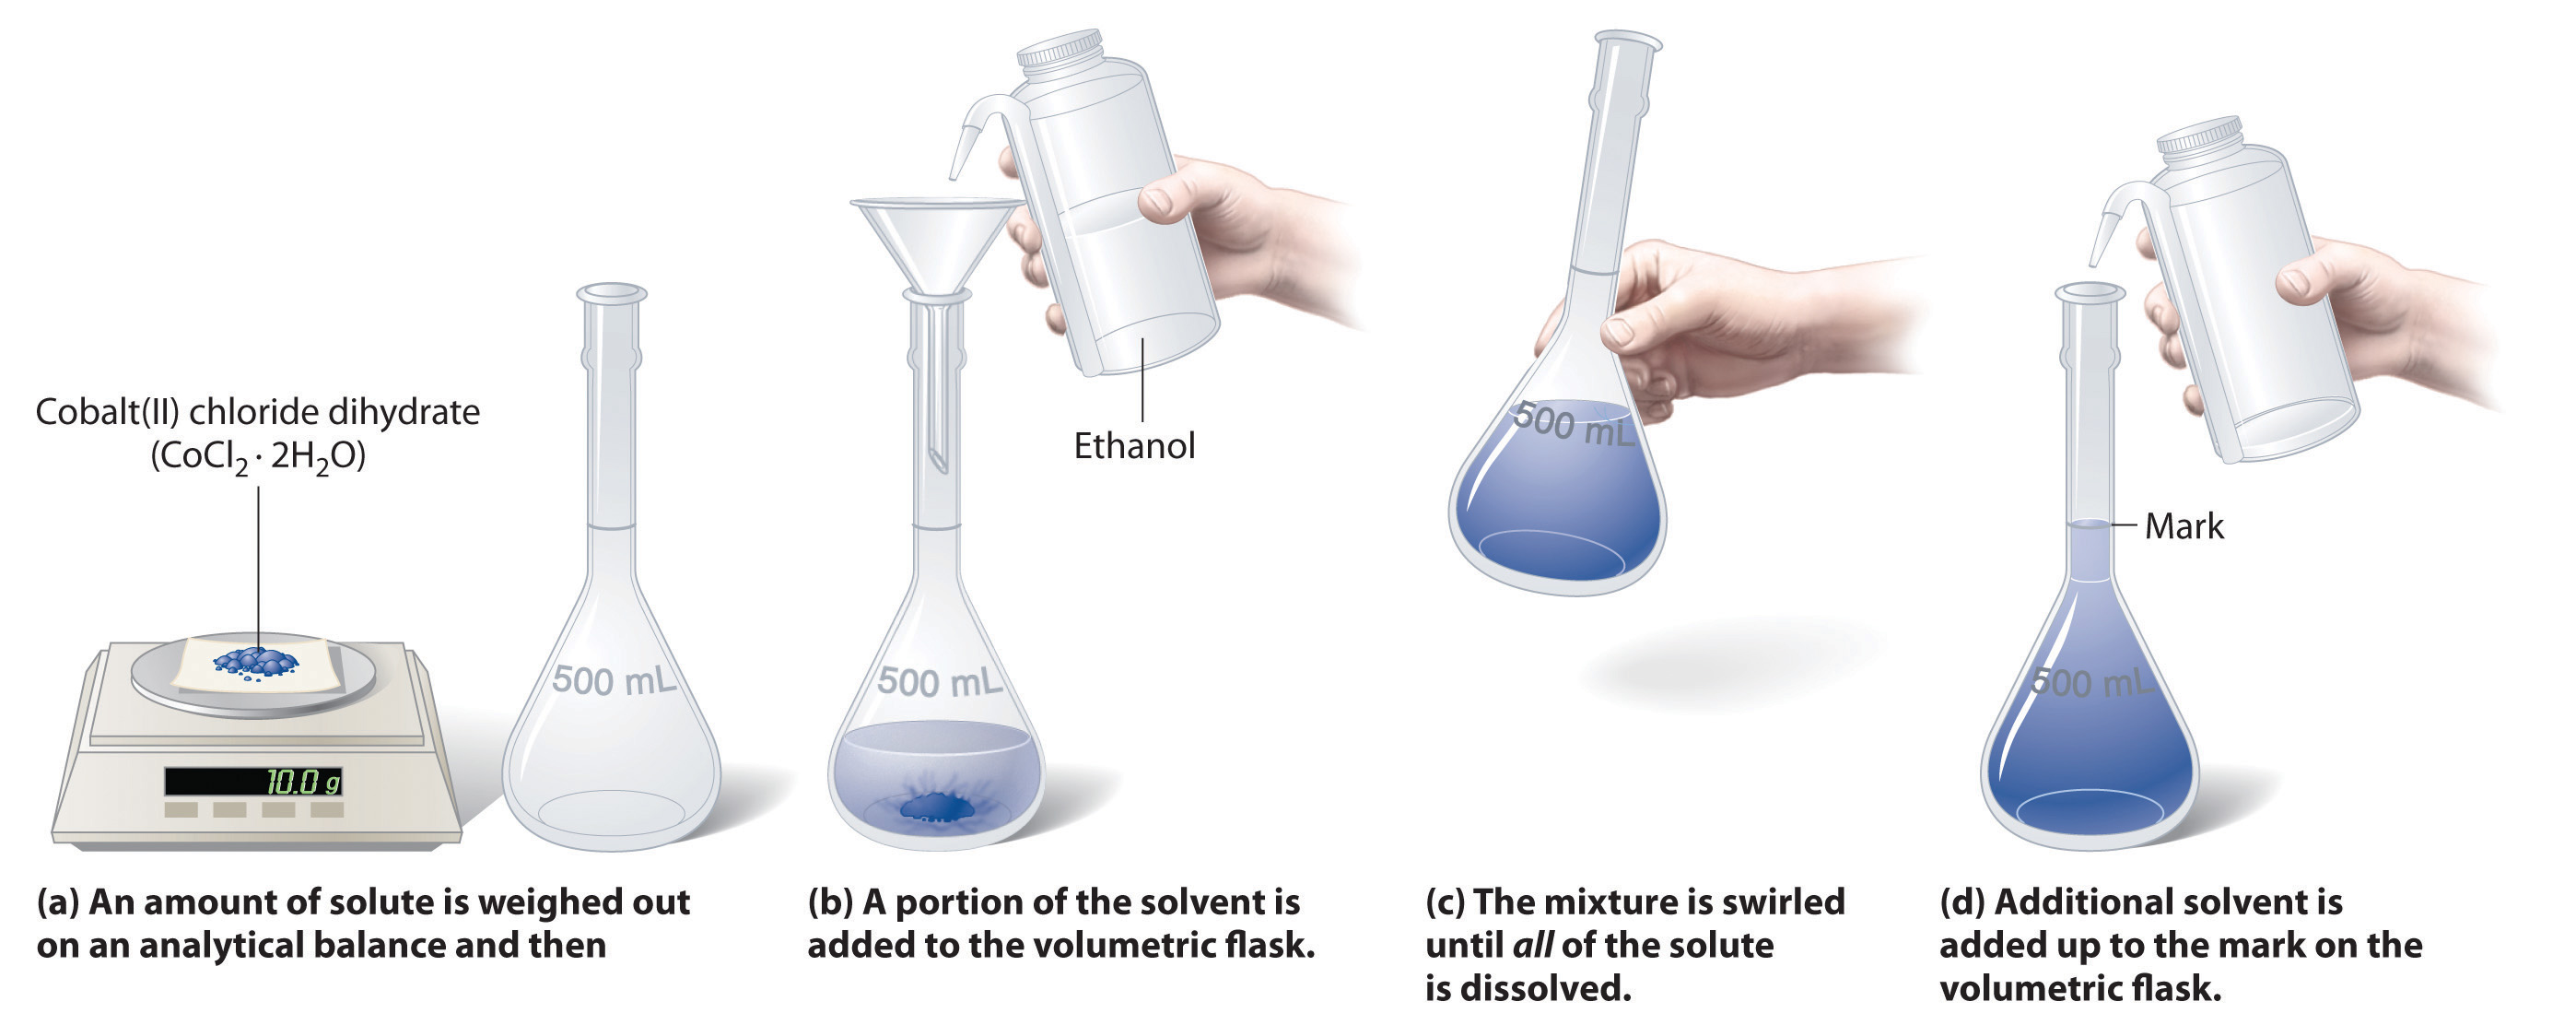 Diagram of preparation of a solution of known concentration using a solid state. A. An amount of solute is weighed out on an analytical balance. B. A portion of the solvent is added to the volumetric flask. C. The mixture is swirled until all of the solute is dissolved. D. Additional solvent is added up to the mark on the volumetric flask.